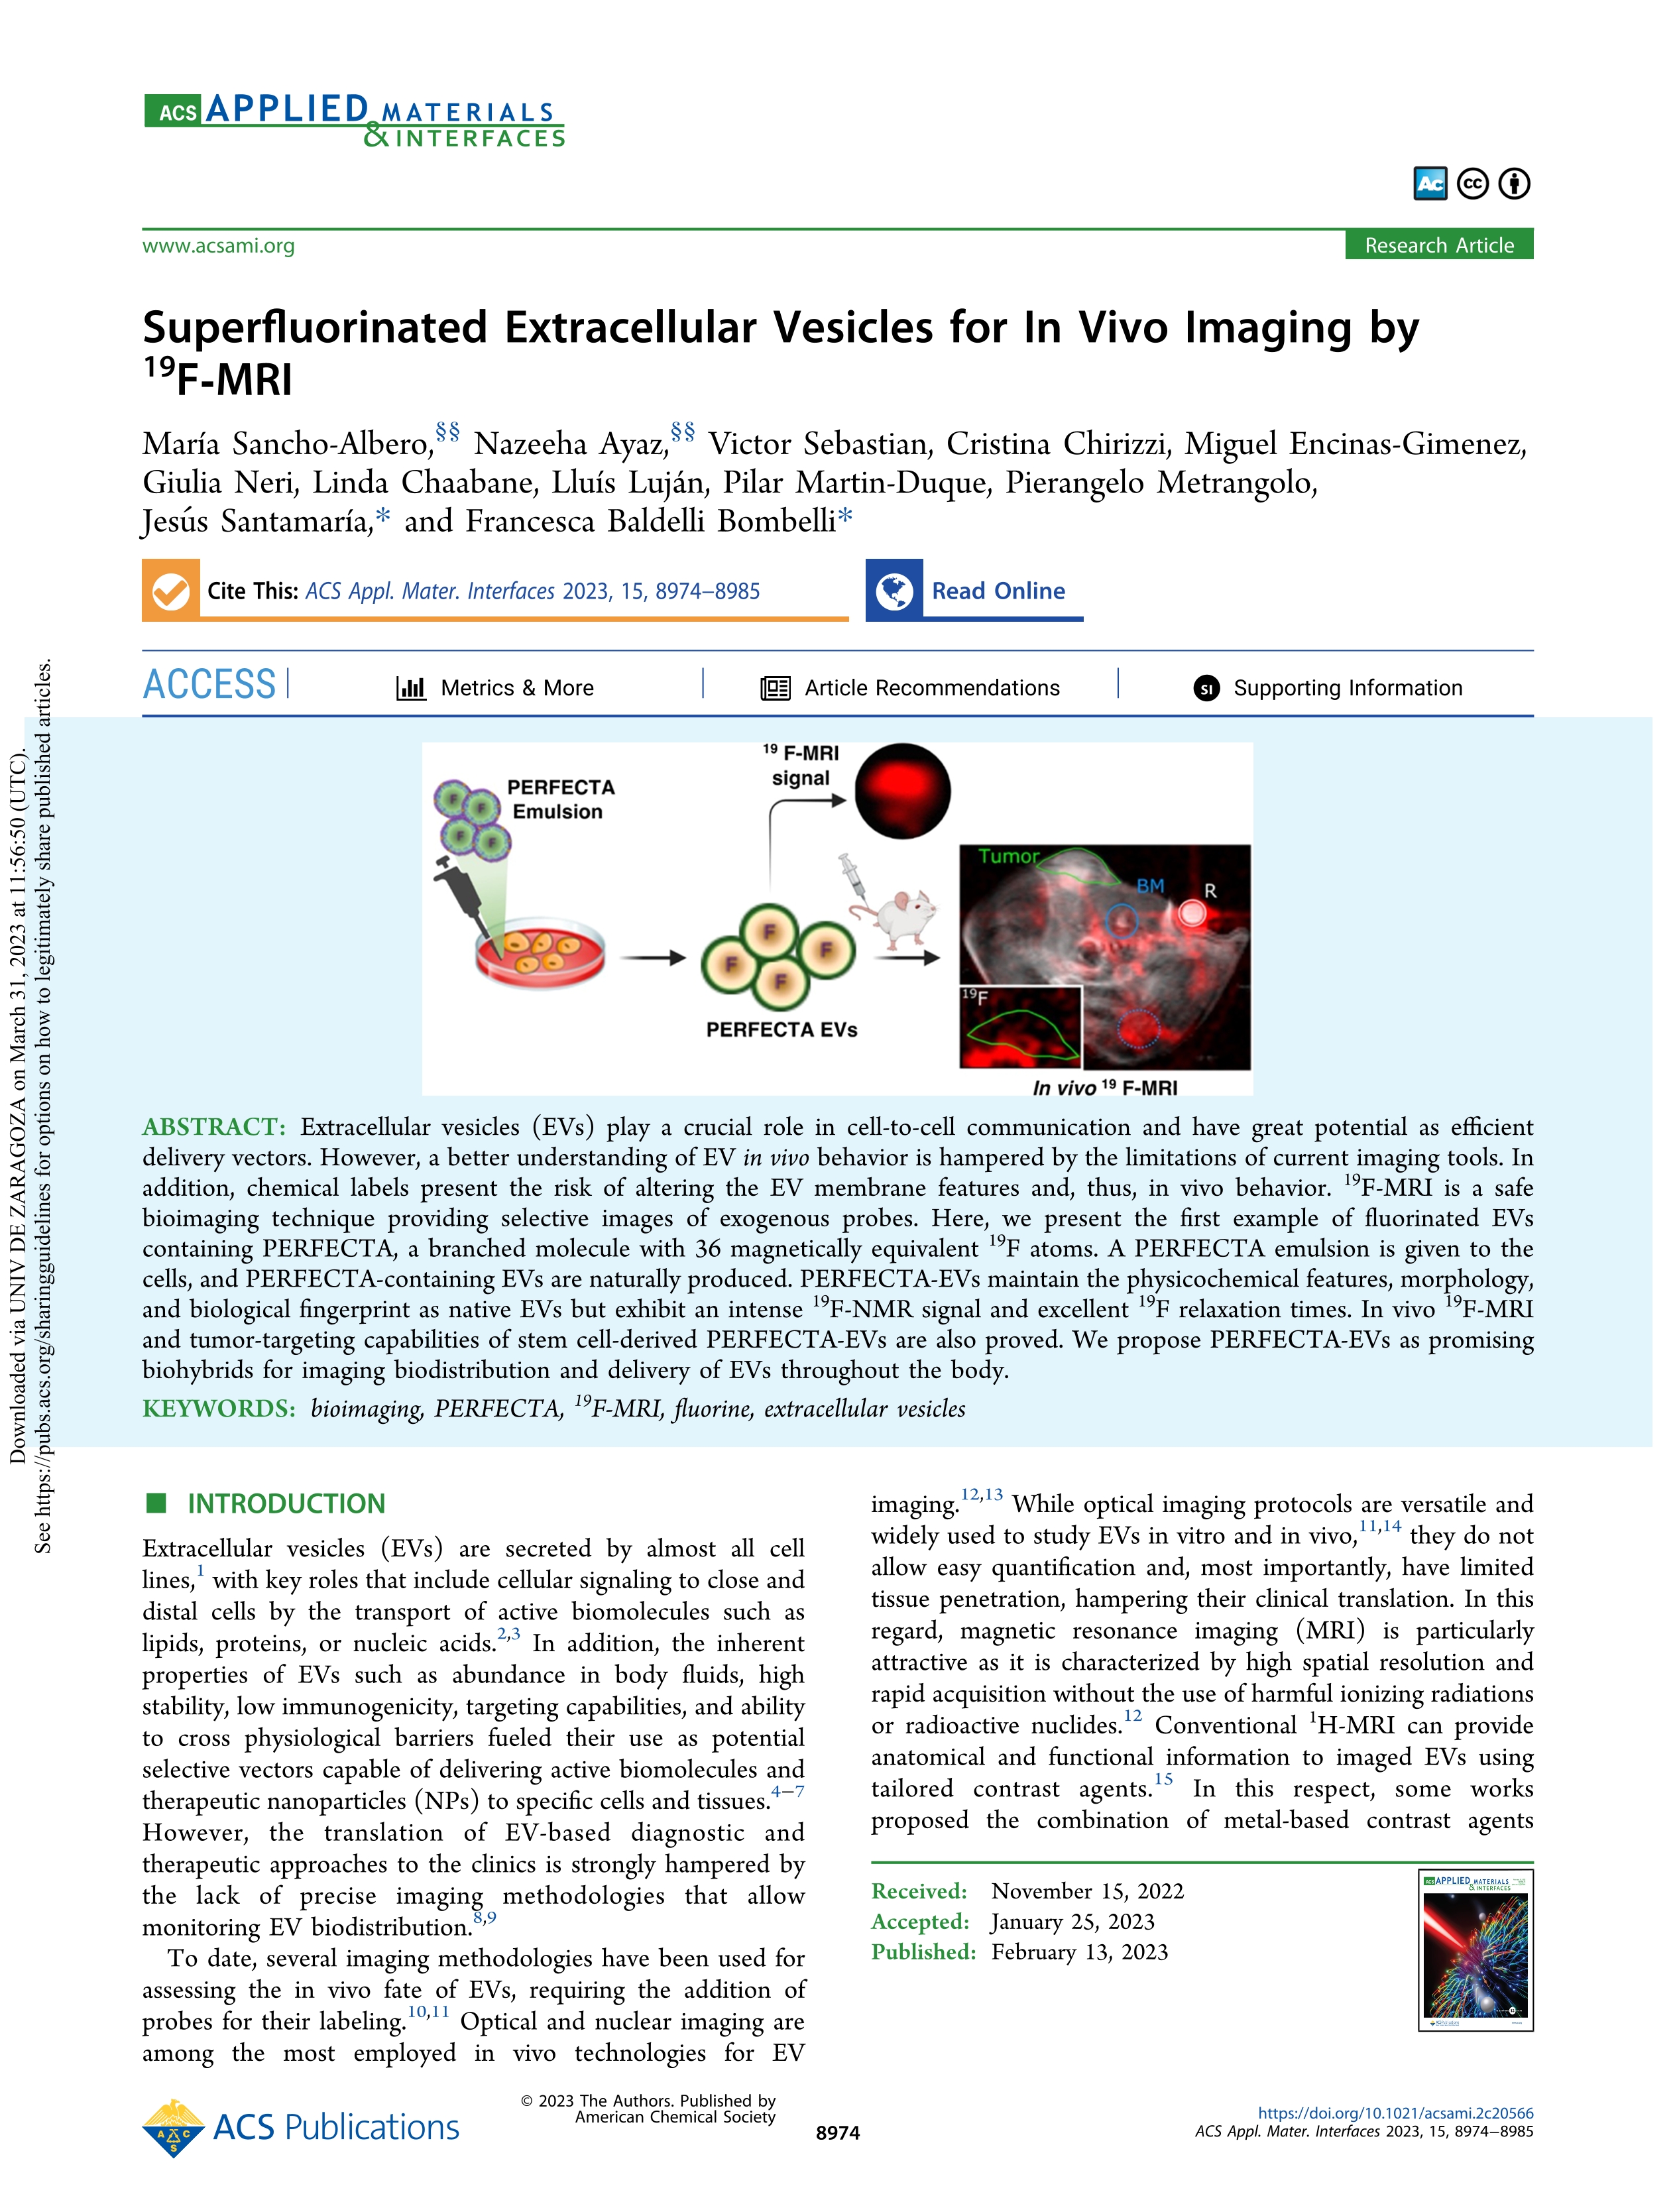 Superfluorinated extracellular vesicles for in vivo imaging by 19f-mri